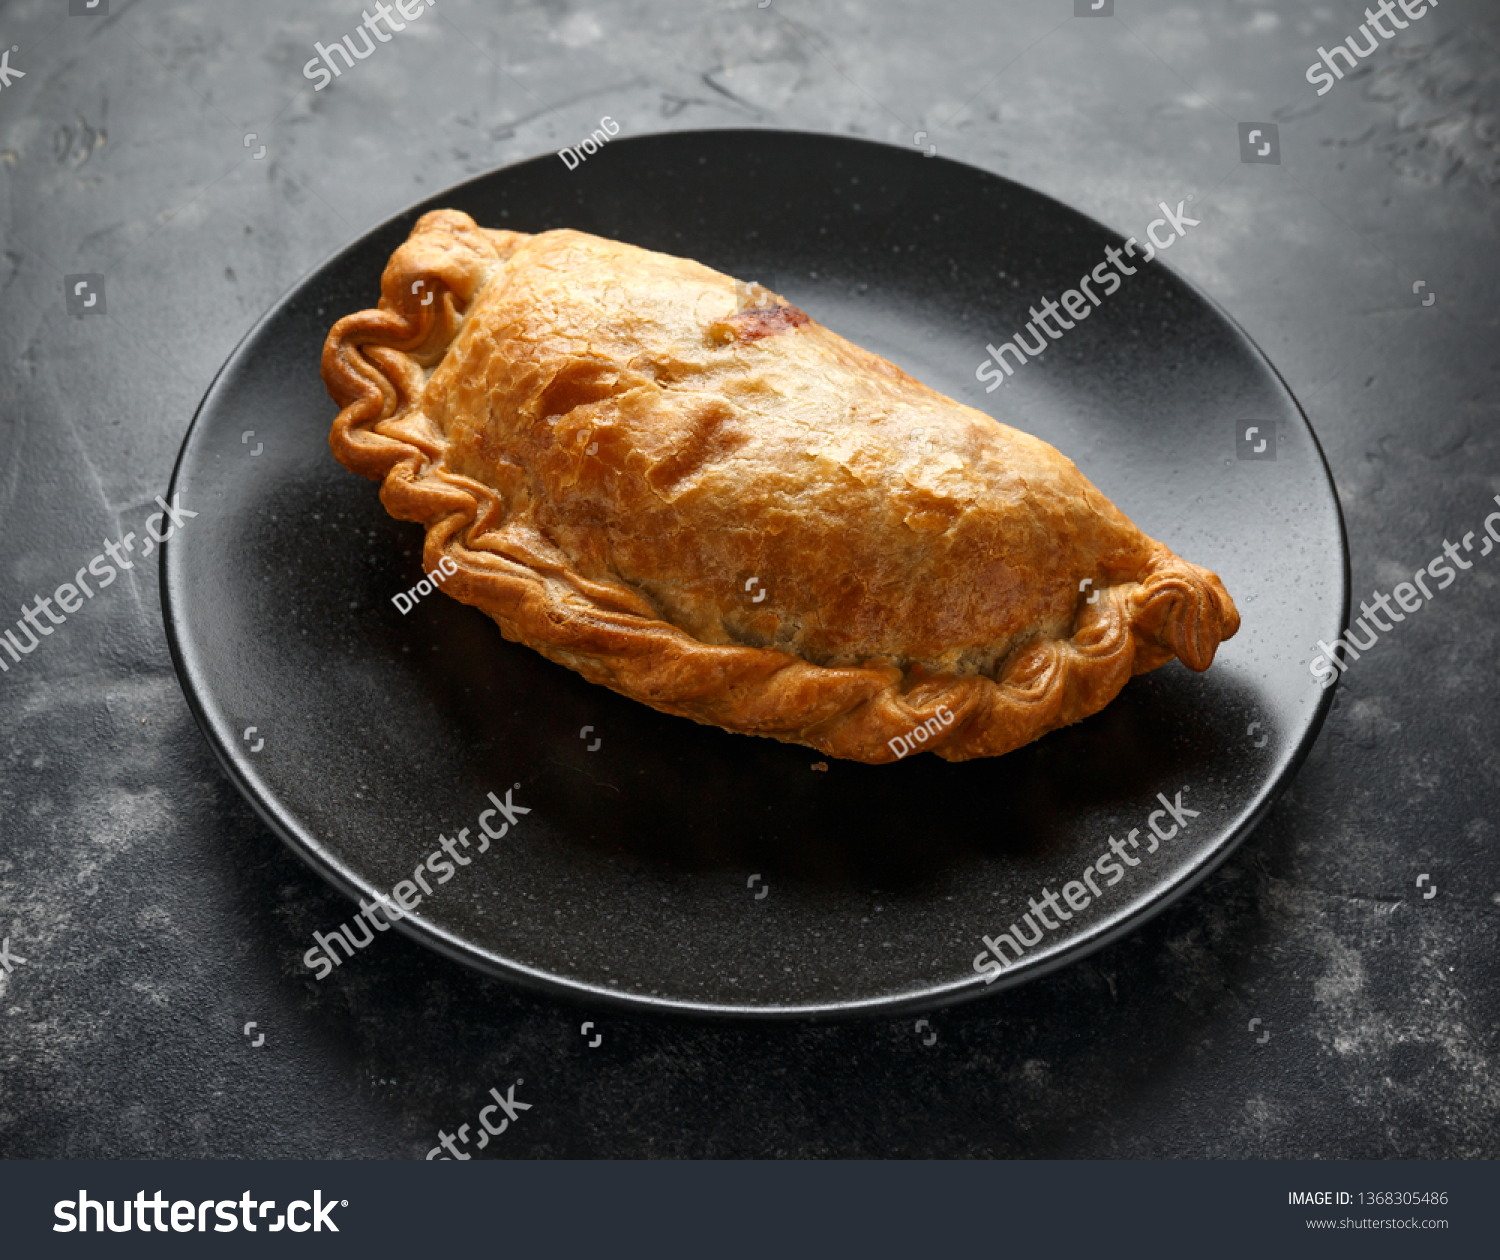 Traditional Cornish pasty filled with beef meat, potato and vegetables on black plate #1368305486